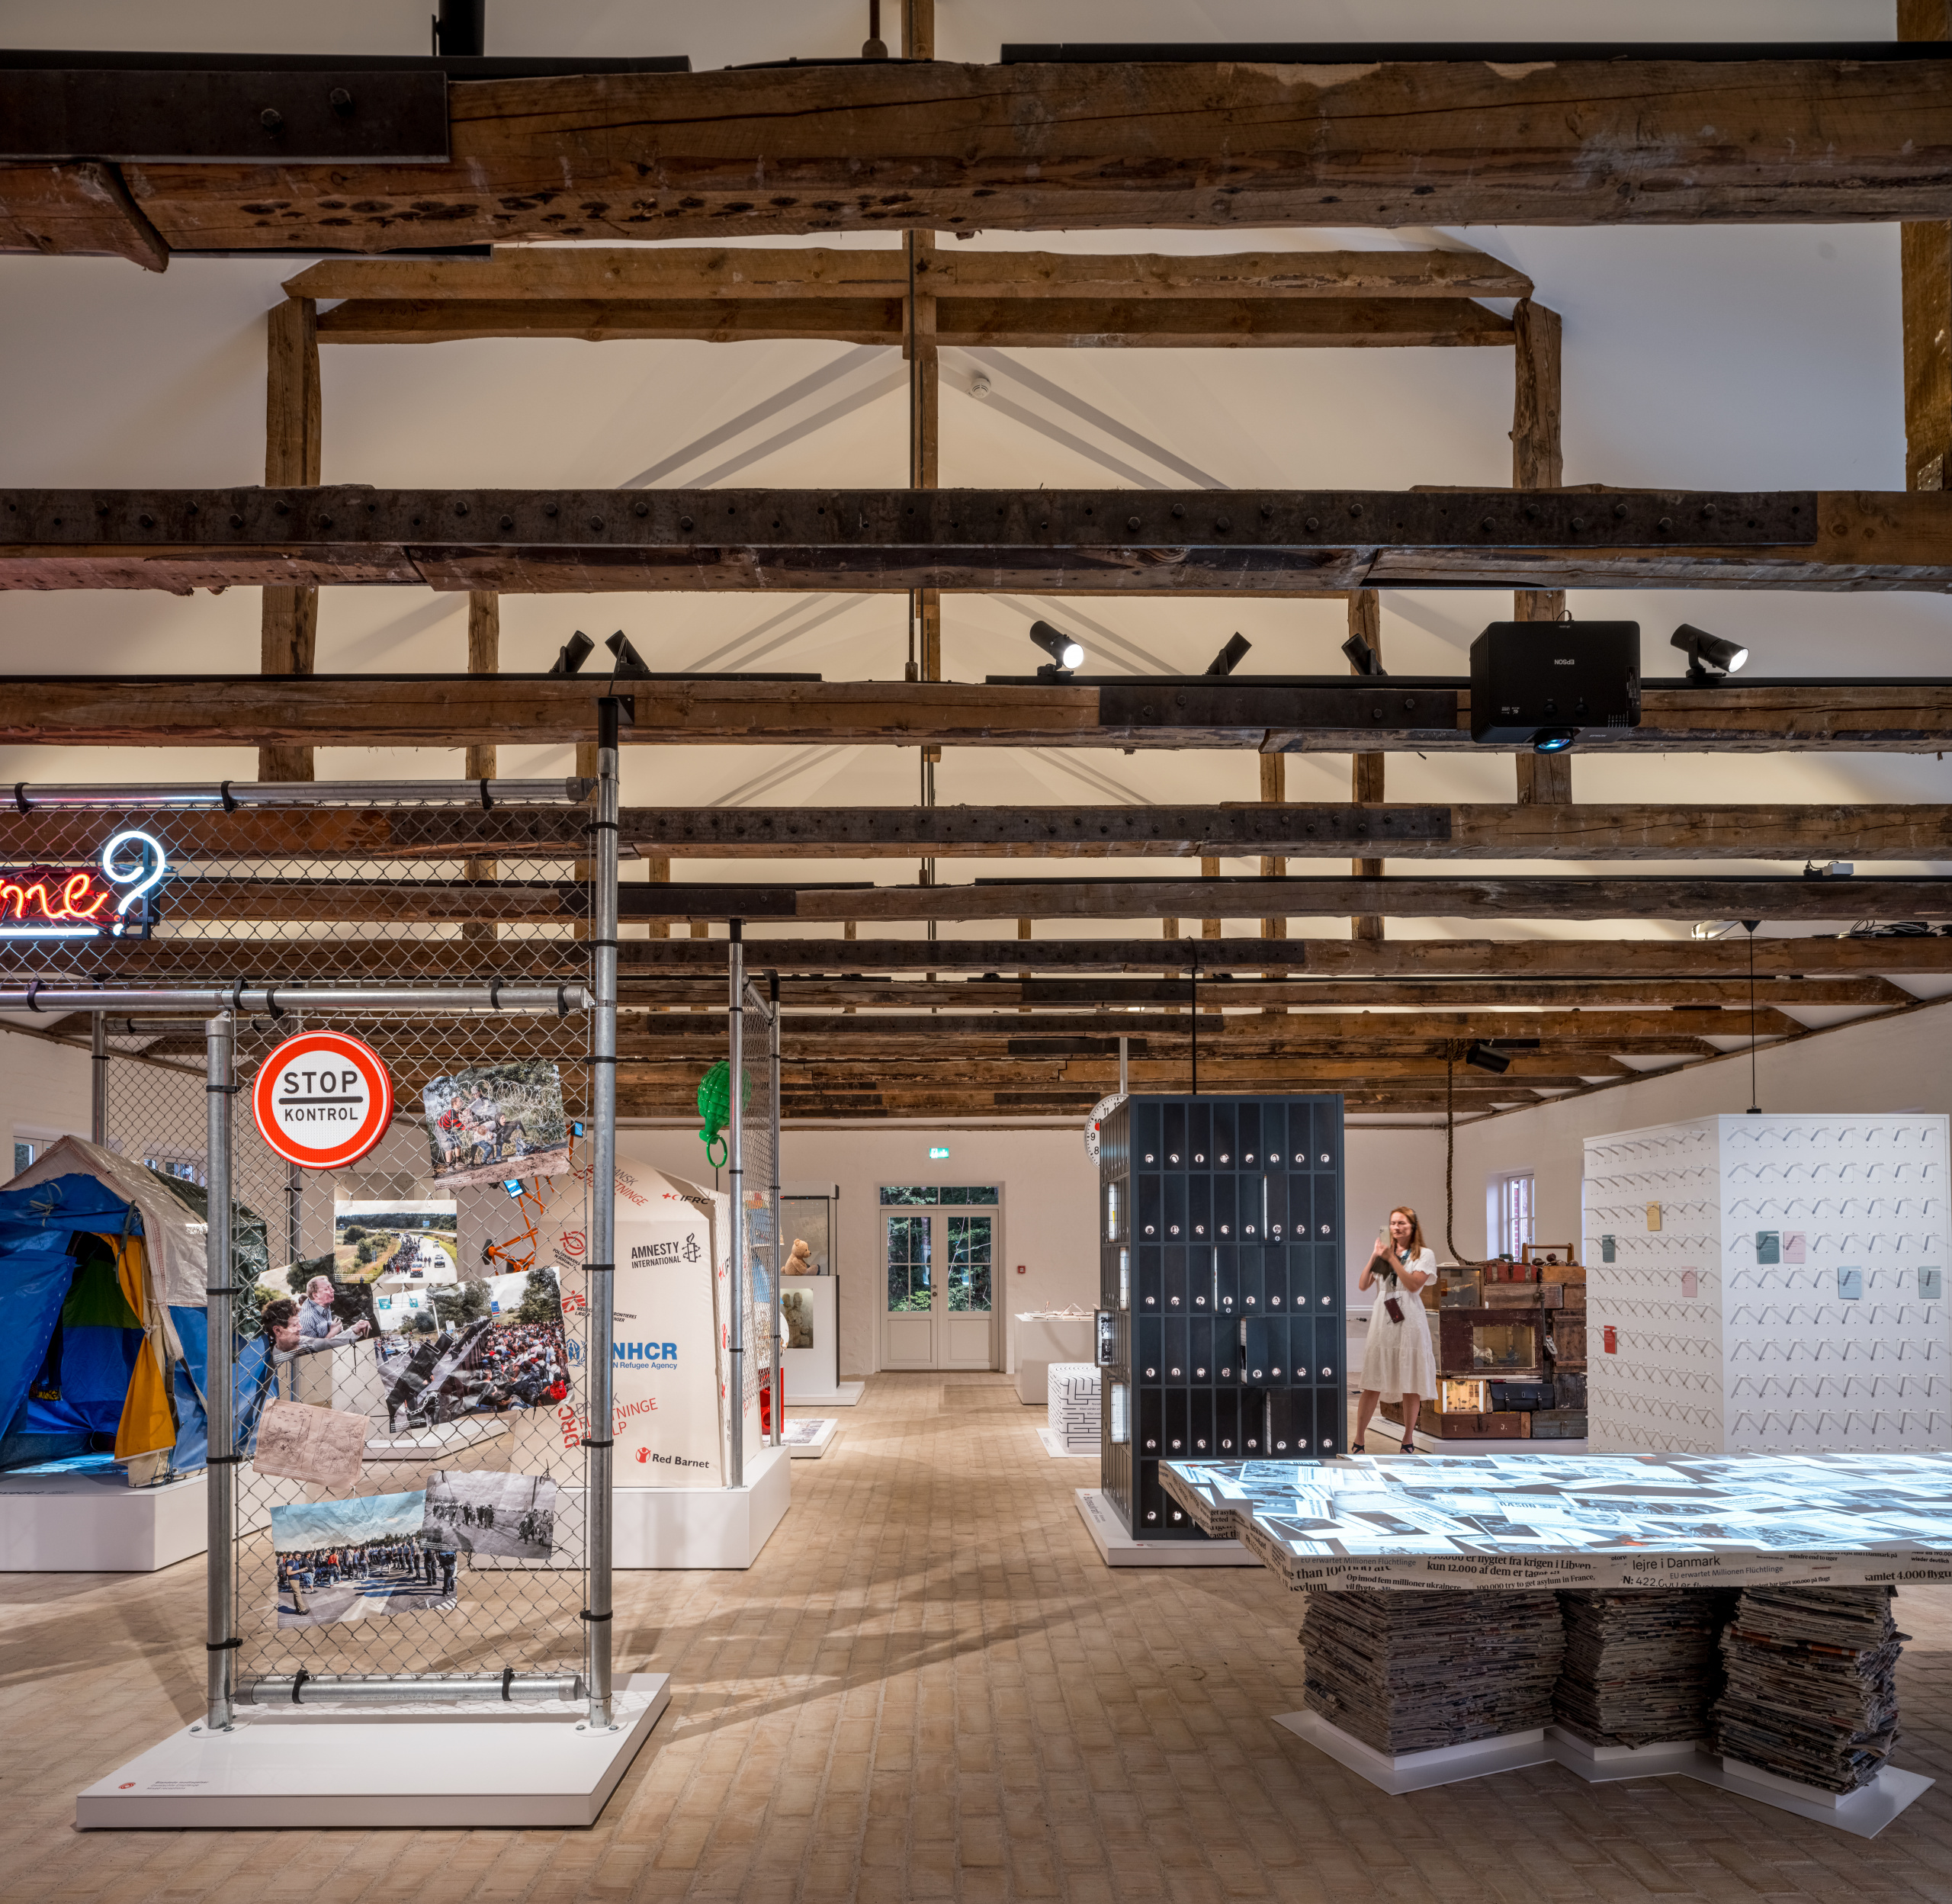 an exhibition displaying personal possessions of refugees